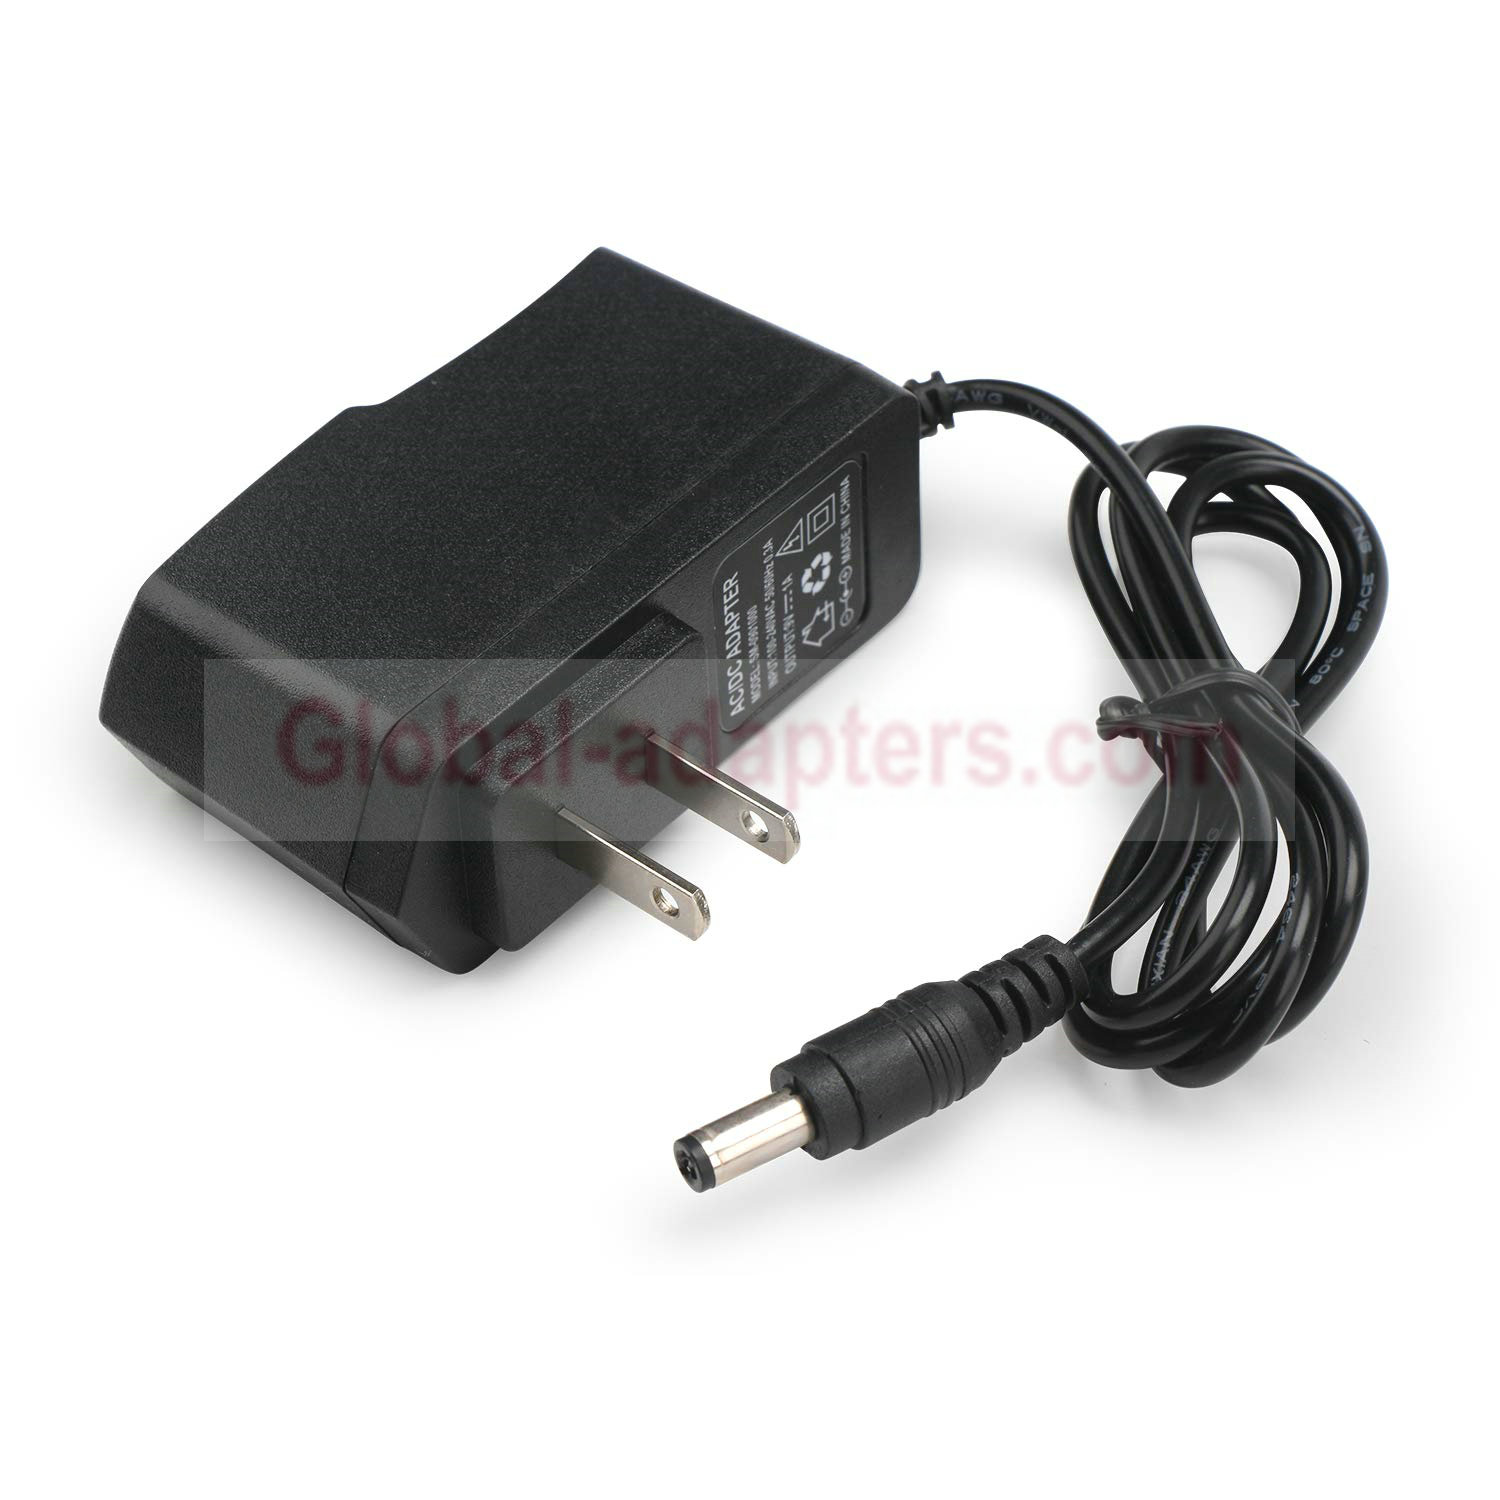 New 9V 1A DROK 091038 Power Supply Ac Adapter for ADSL Router Devices - Click Image to Close